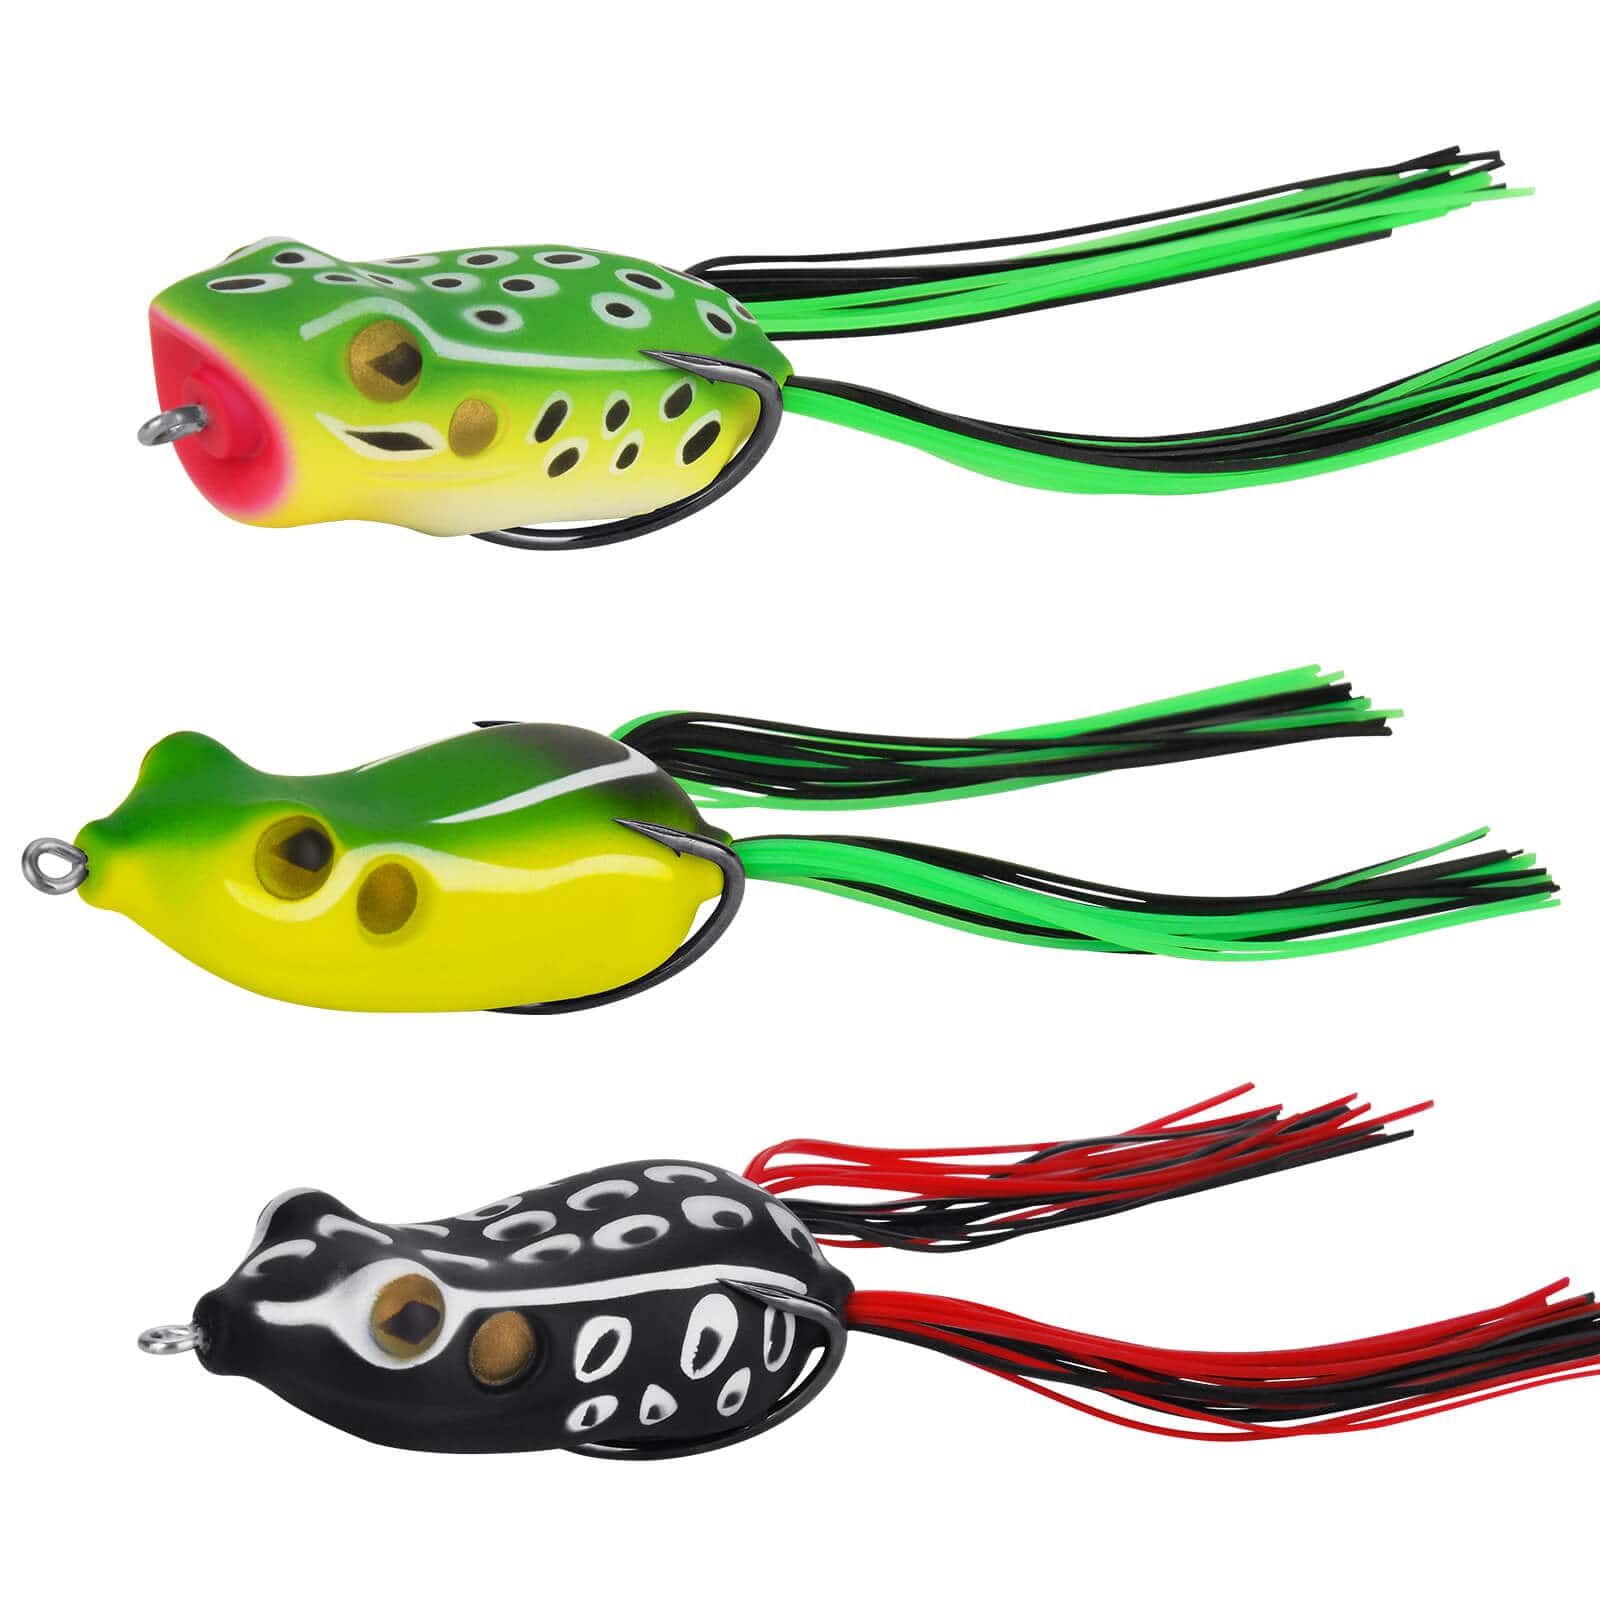 5pcs Realistic Frog Shaped Fishing Lures With Box Packaging